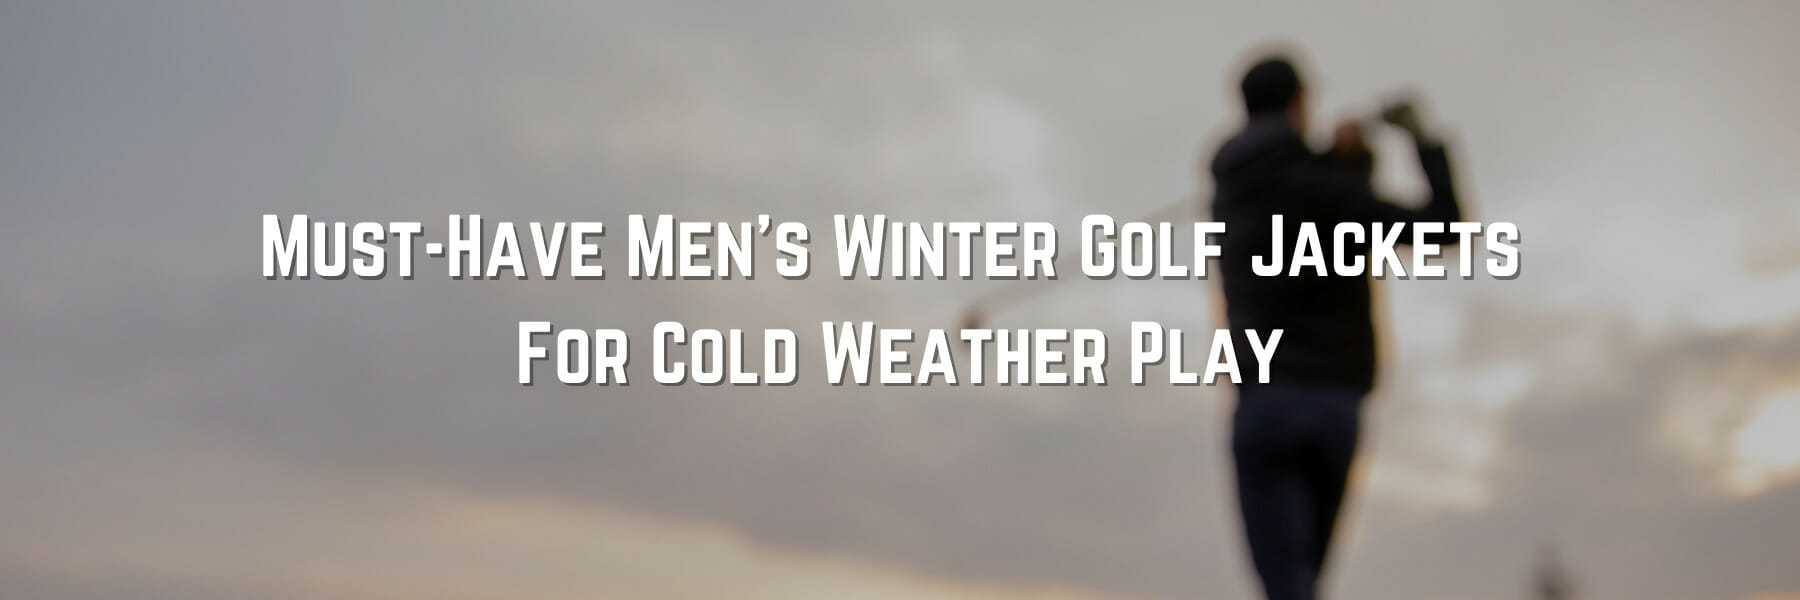 Must-Have Men’s Winter Golf Gloves For Cold Weather Play